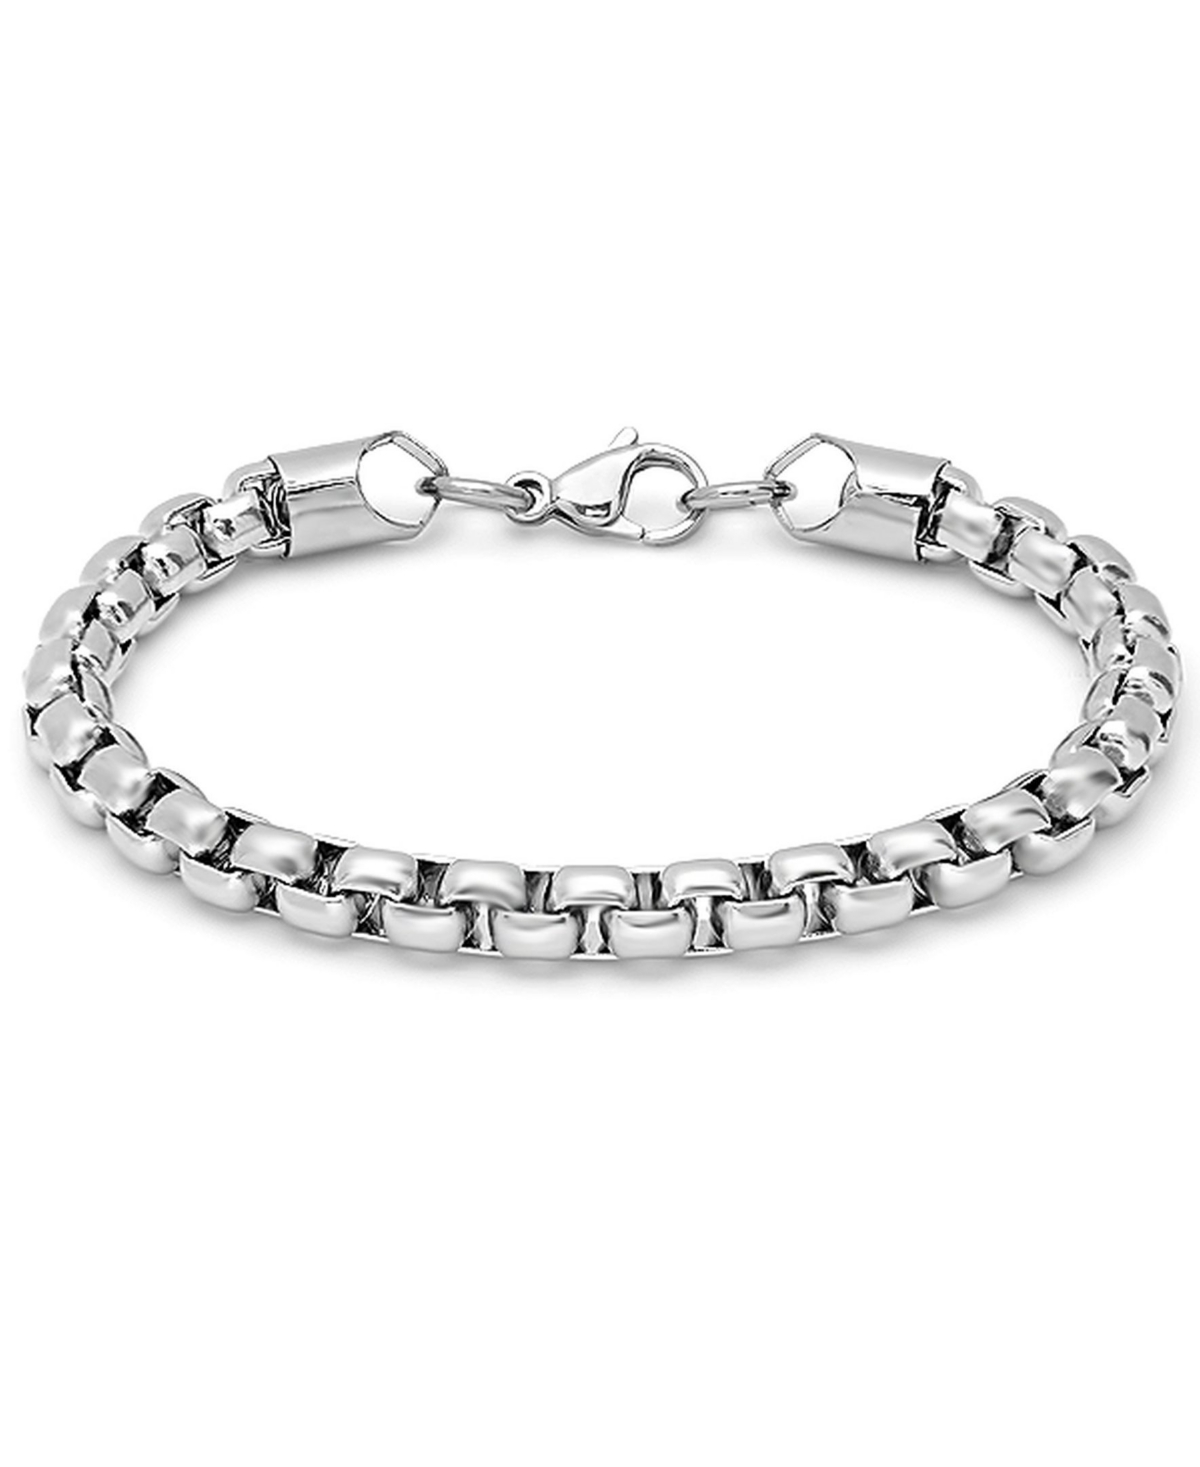 Shop Steeltime Men's Stainless Steel Thick Round Box Link Bracelet In Silver